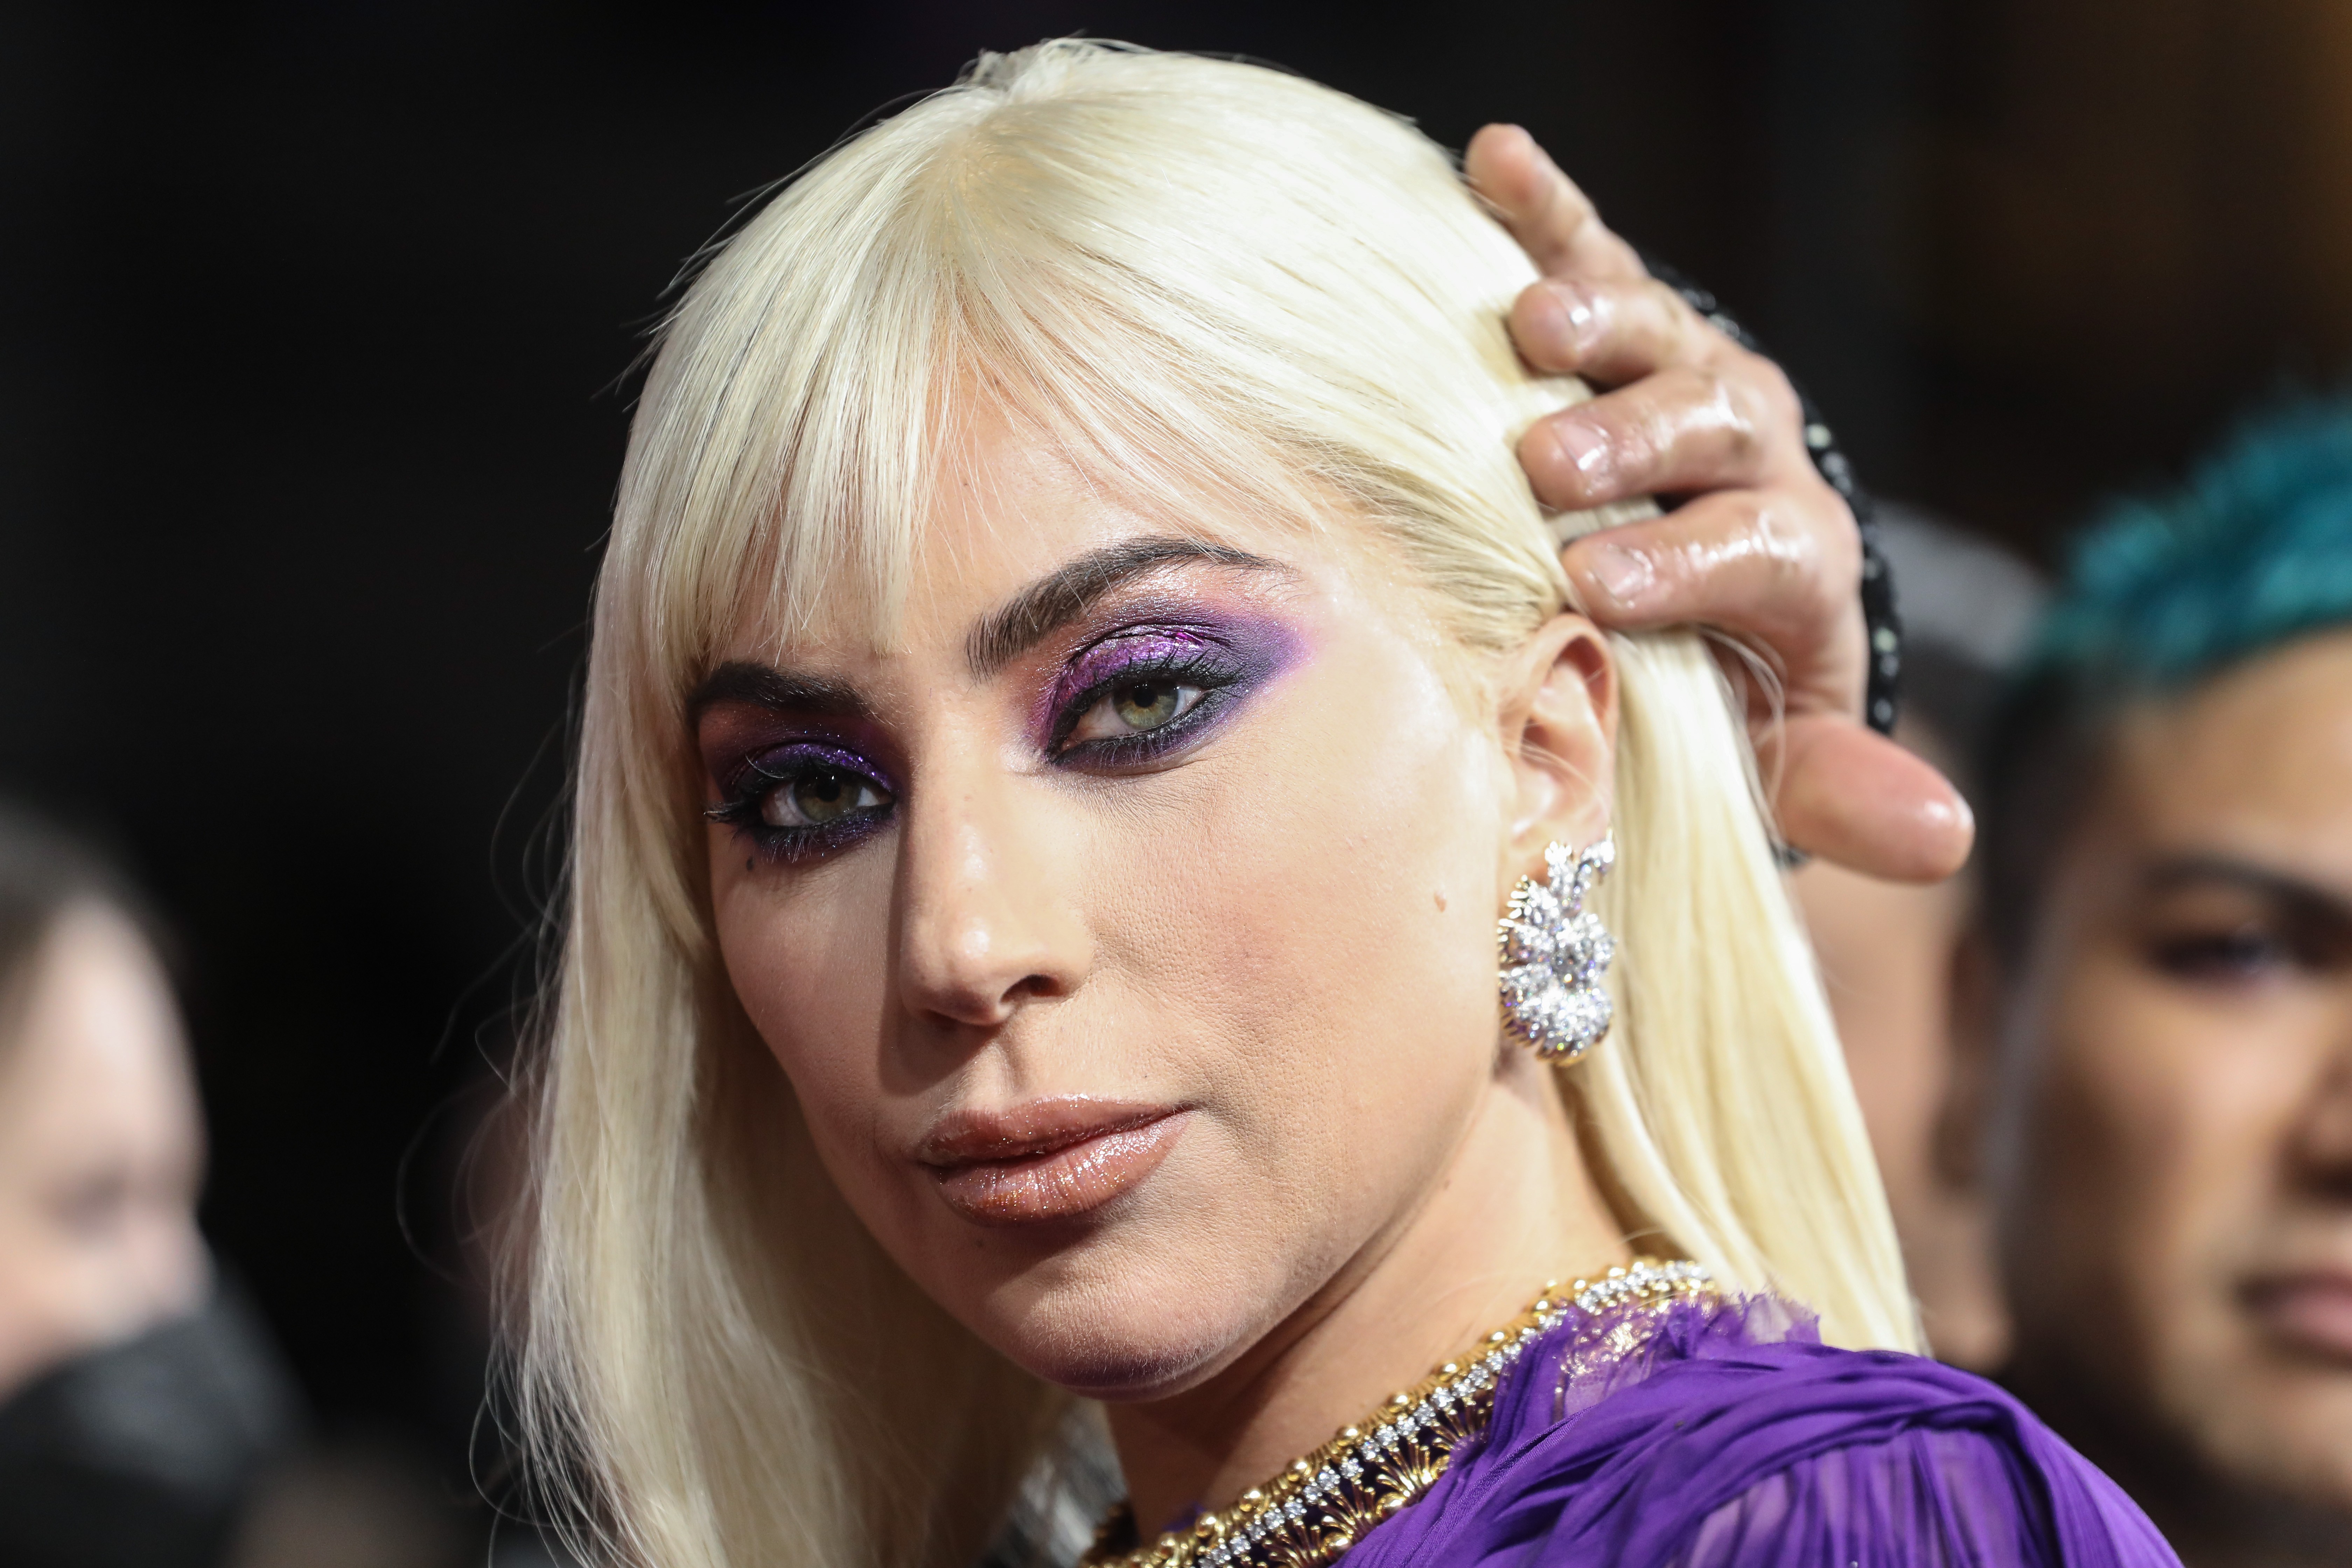 LONDON, ENGLAND - NOVEMBER 09:  Lady Gaga attends the UK Premiere Of "House of Gucci" at the Odeon Luxe Leicester Square on November 09, 2021 in London, England. (Photo by Lia Toby/Getty Images) (Foto: Getty Images)